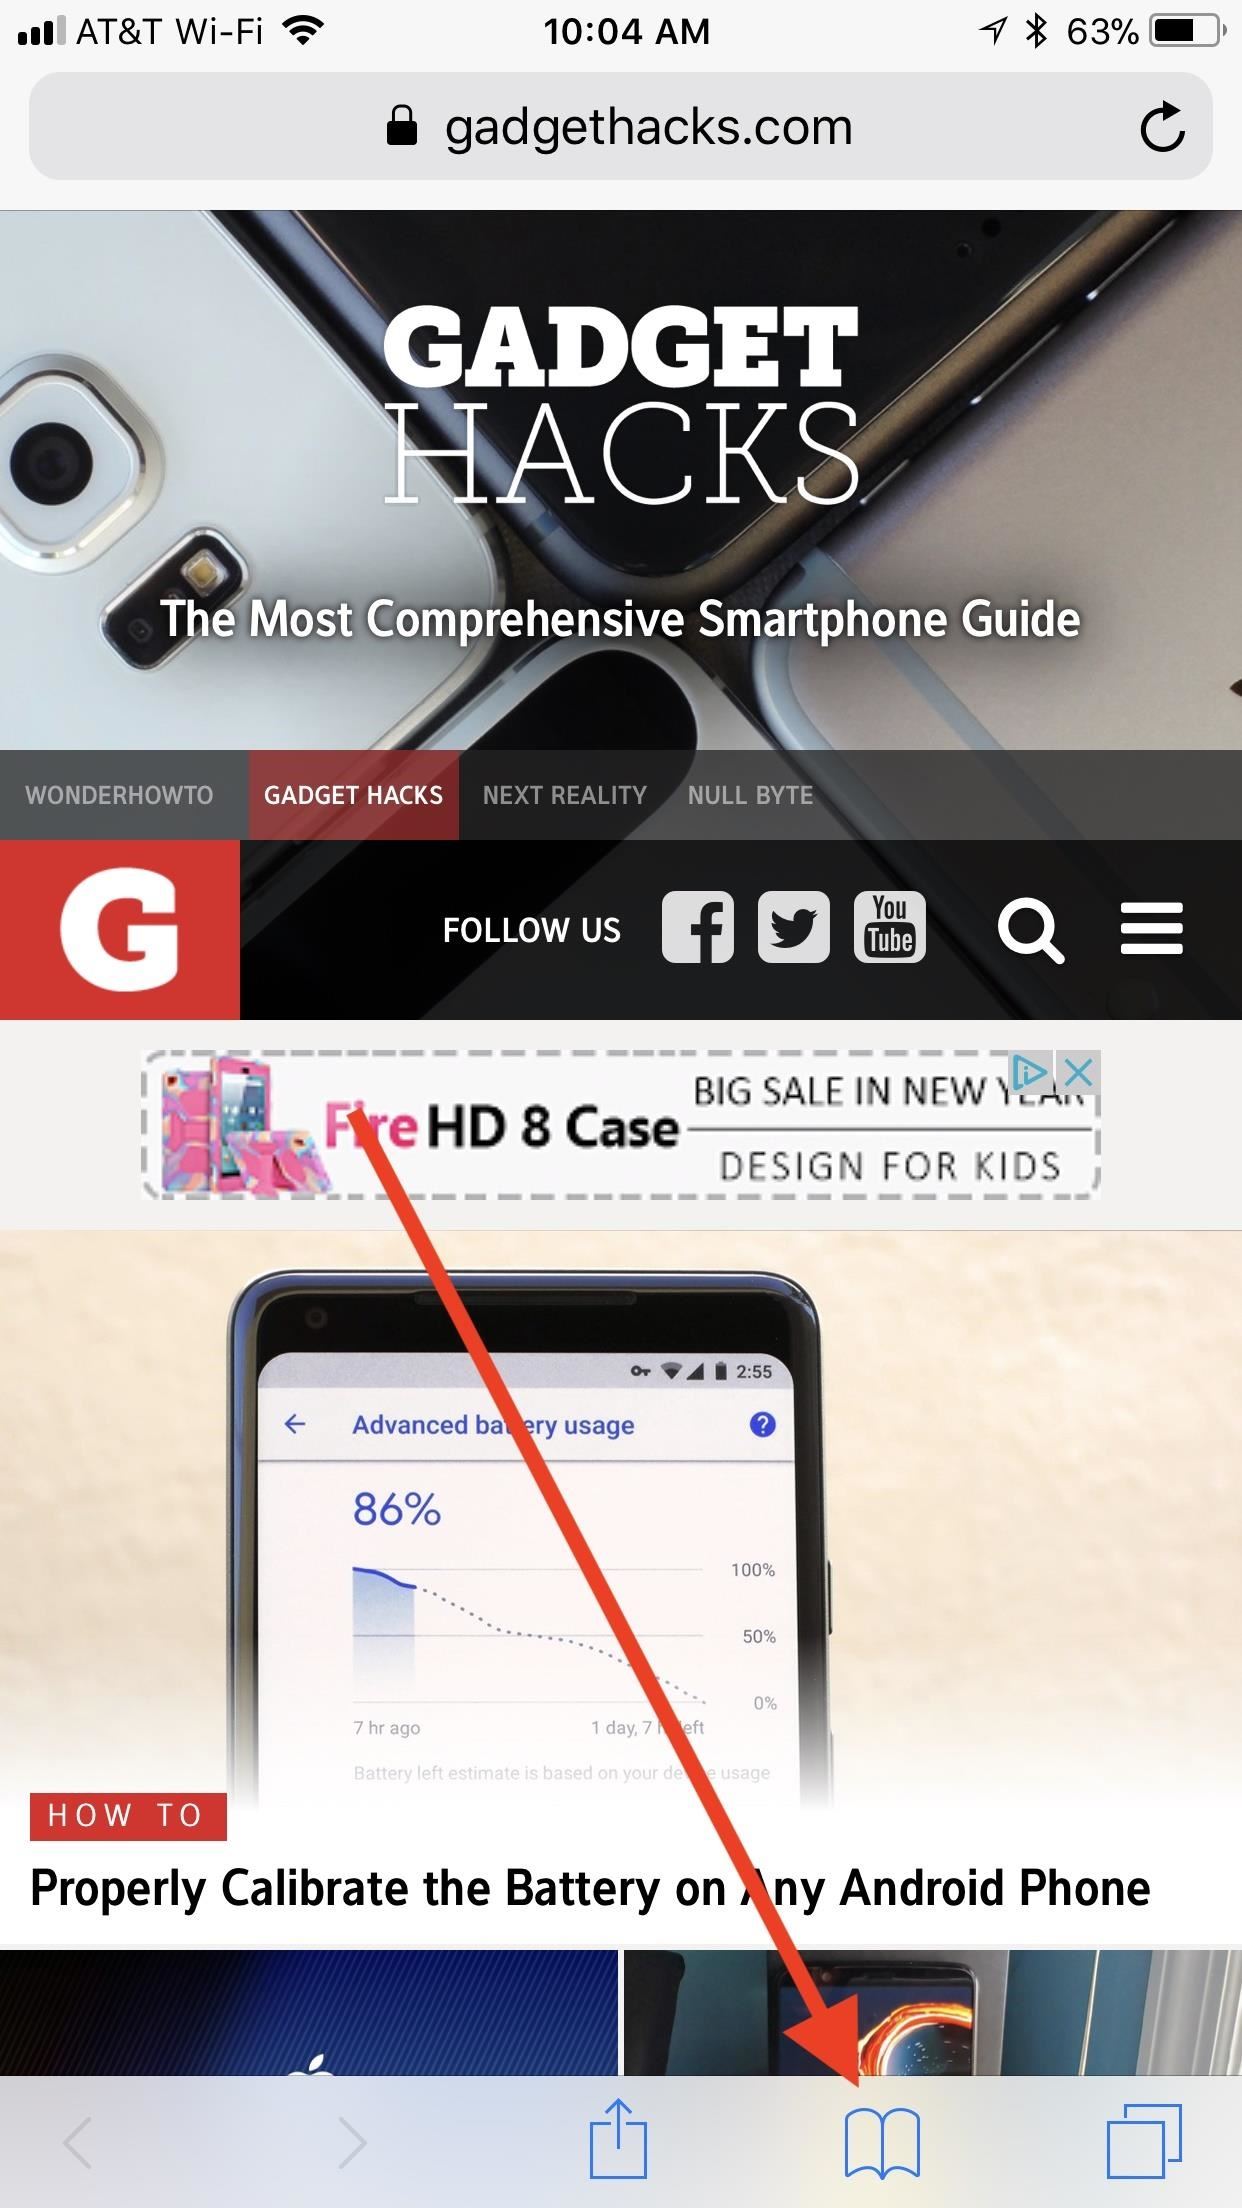 Safari 101: How to Use the Reading List to Save Articles, Videos & More for Later Viewing